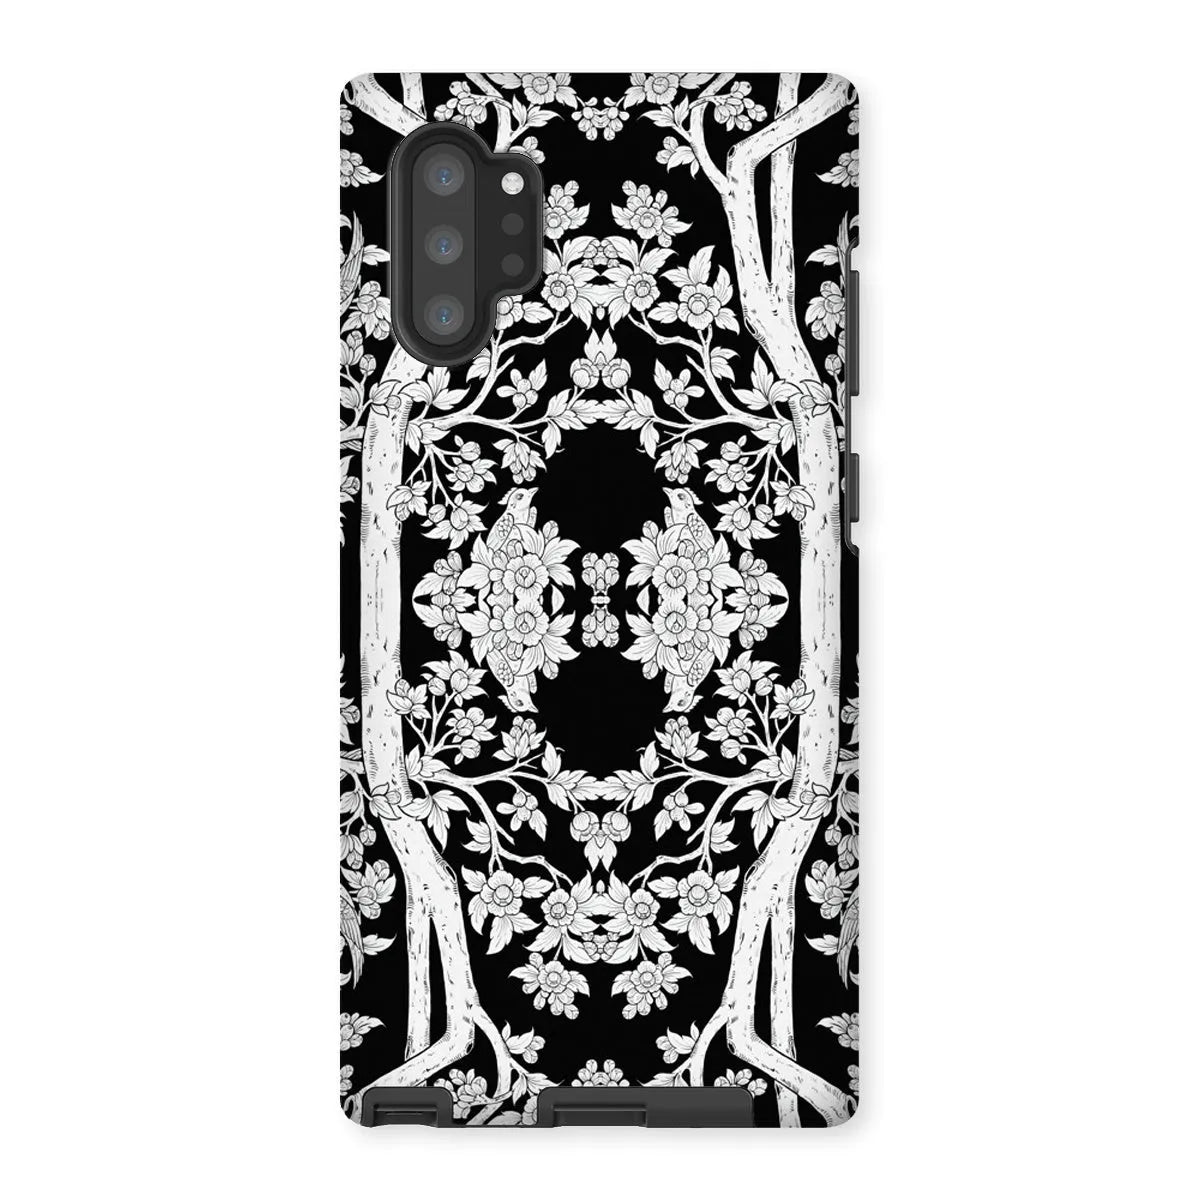 Aviary Black Aesthetic Pattern Art Phone Case - Samsung Galaxy Note 10p / Matte - Mobile Phone Cases - Aesthetic Art